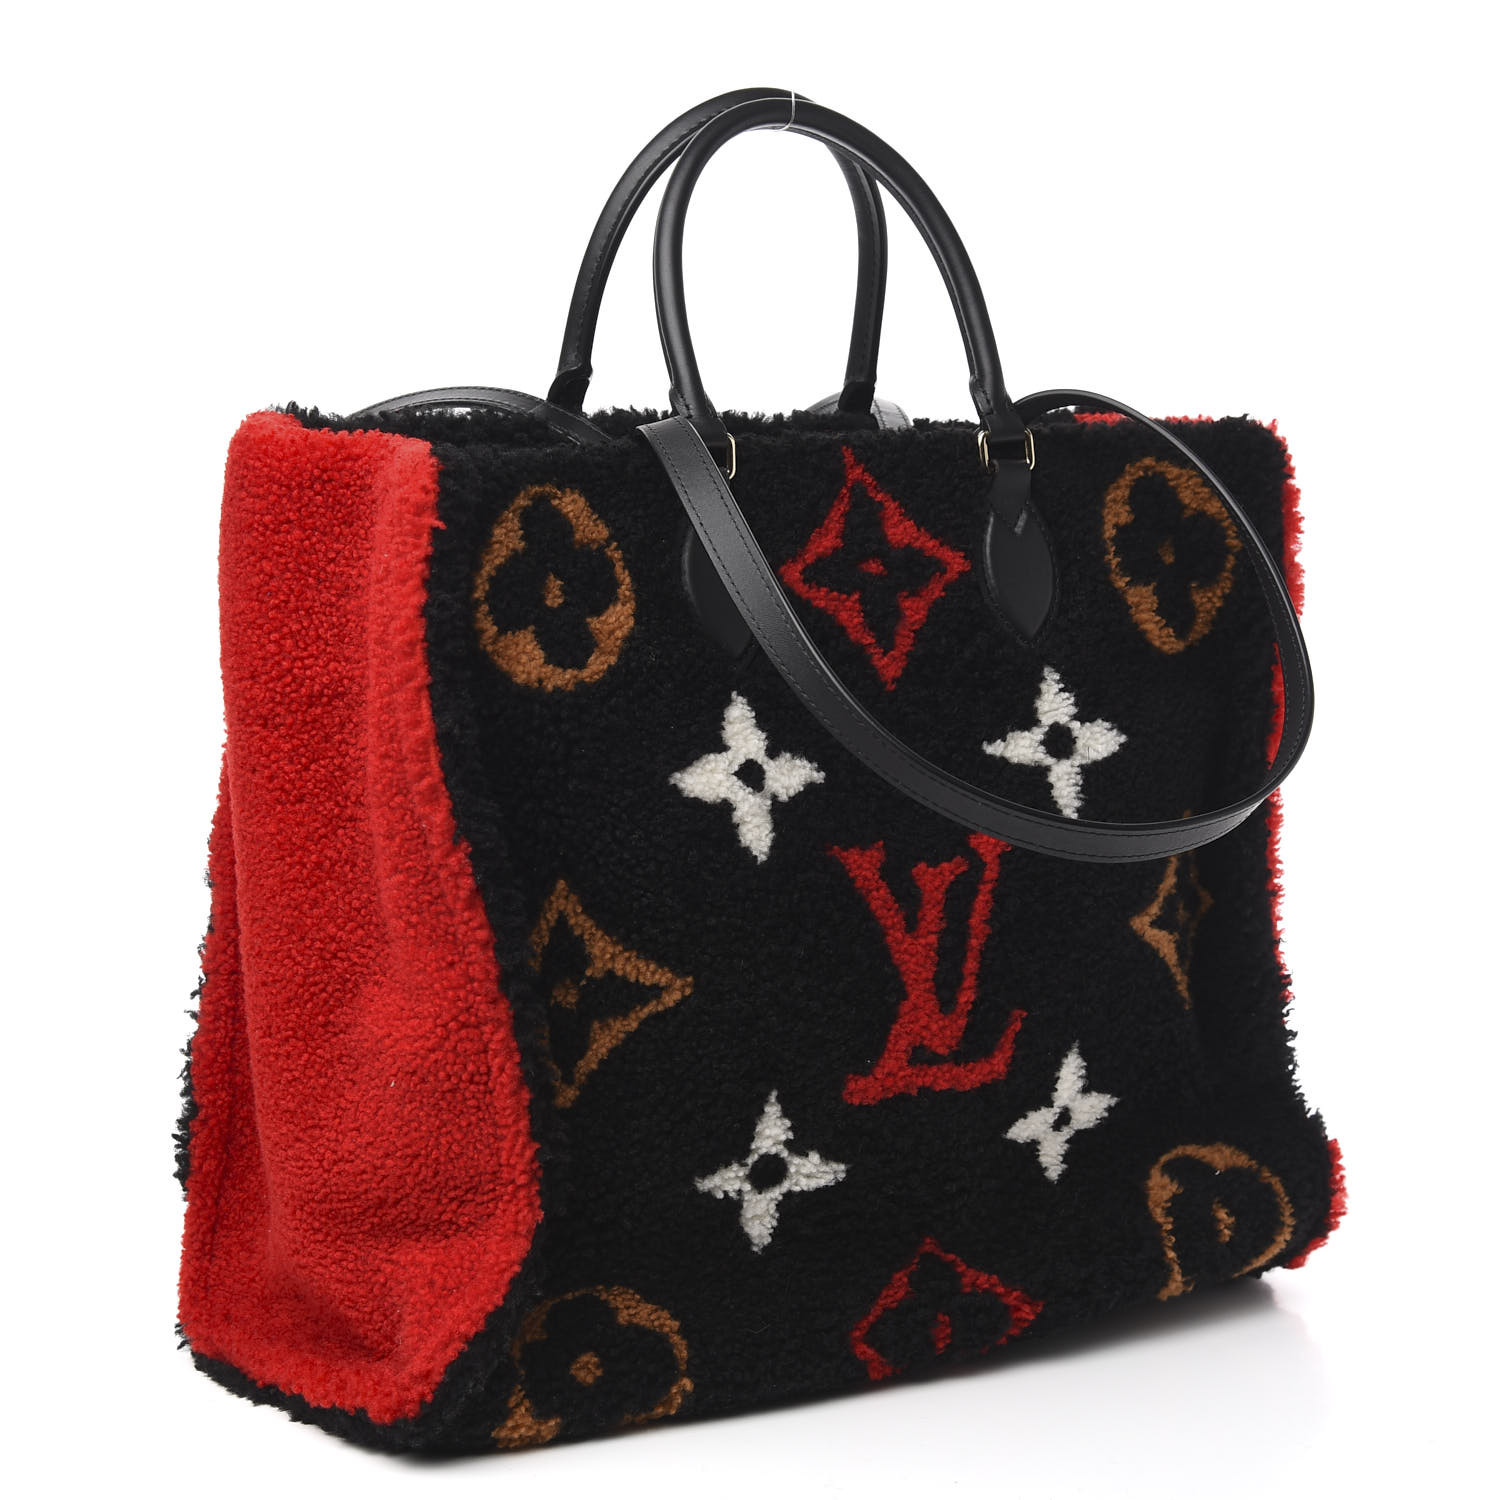 Louis Vuitton 2019 - 60 For Sale on 1stDibs  2019 louis vuitton bags, louis  vuitton limited edition bags 2019, louis vuitton 2019 collection bags